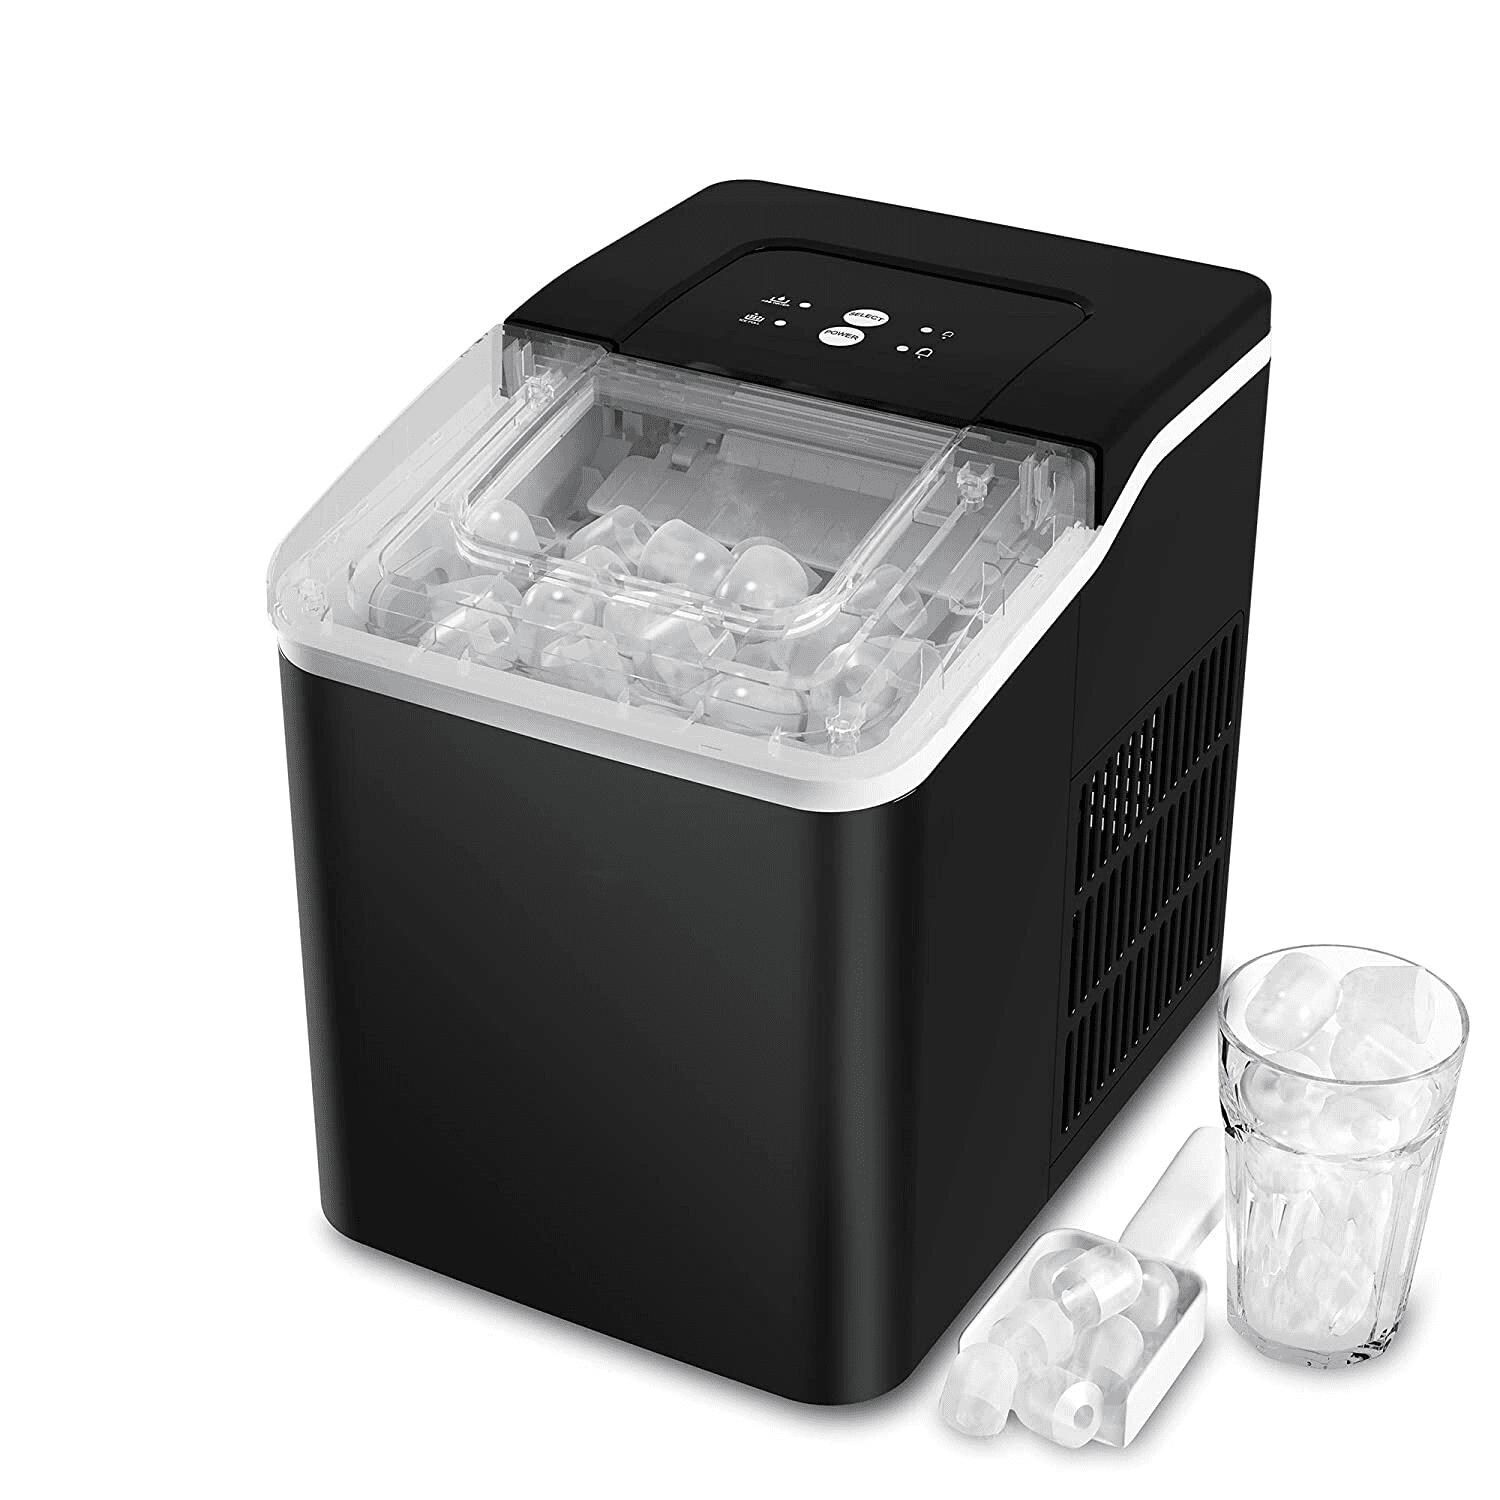 Ice Maker Countertop Portable Ice Maker 9 Cubes Ready in 7-8Mins